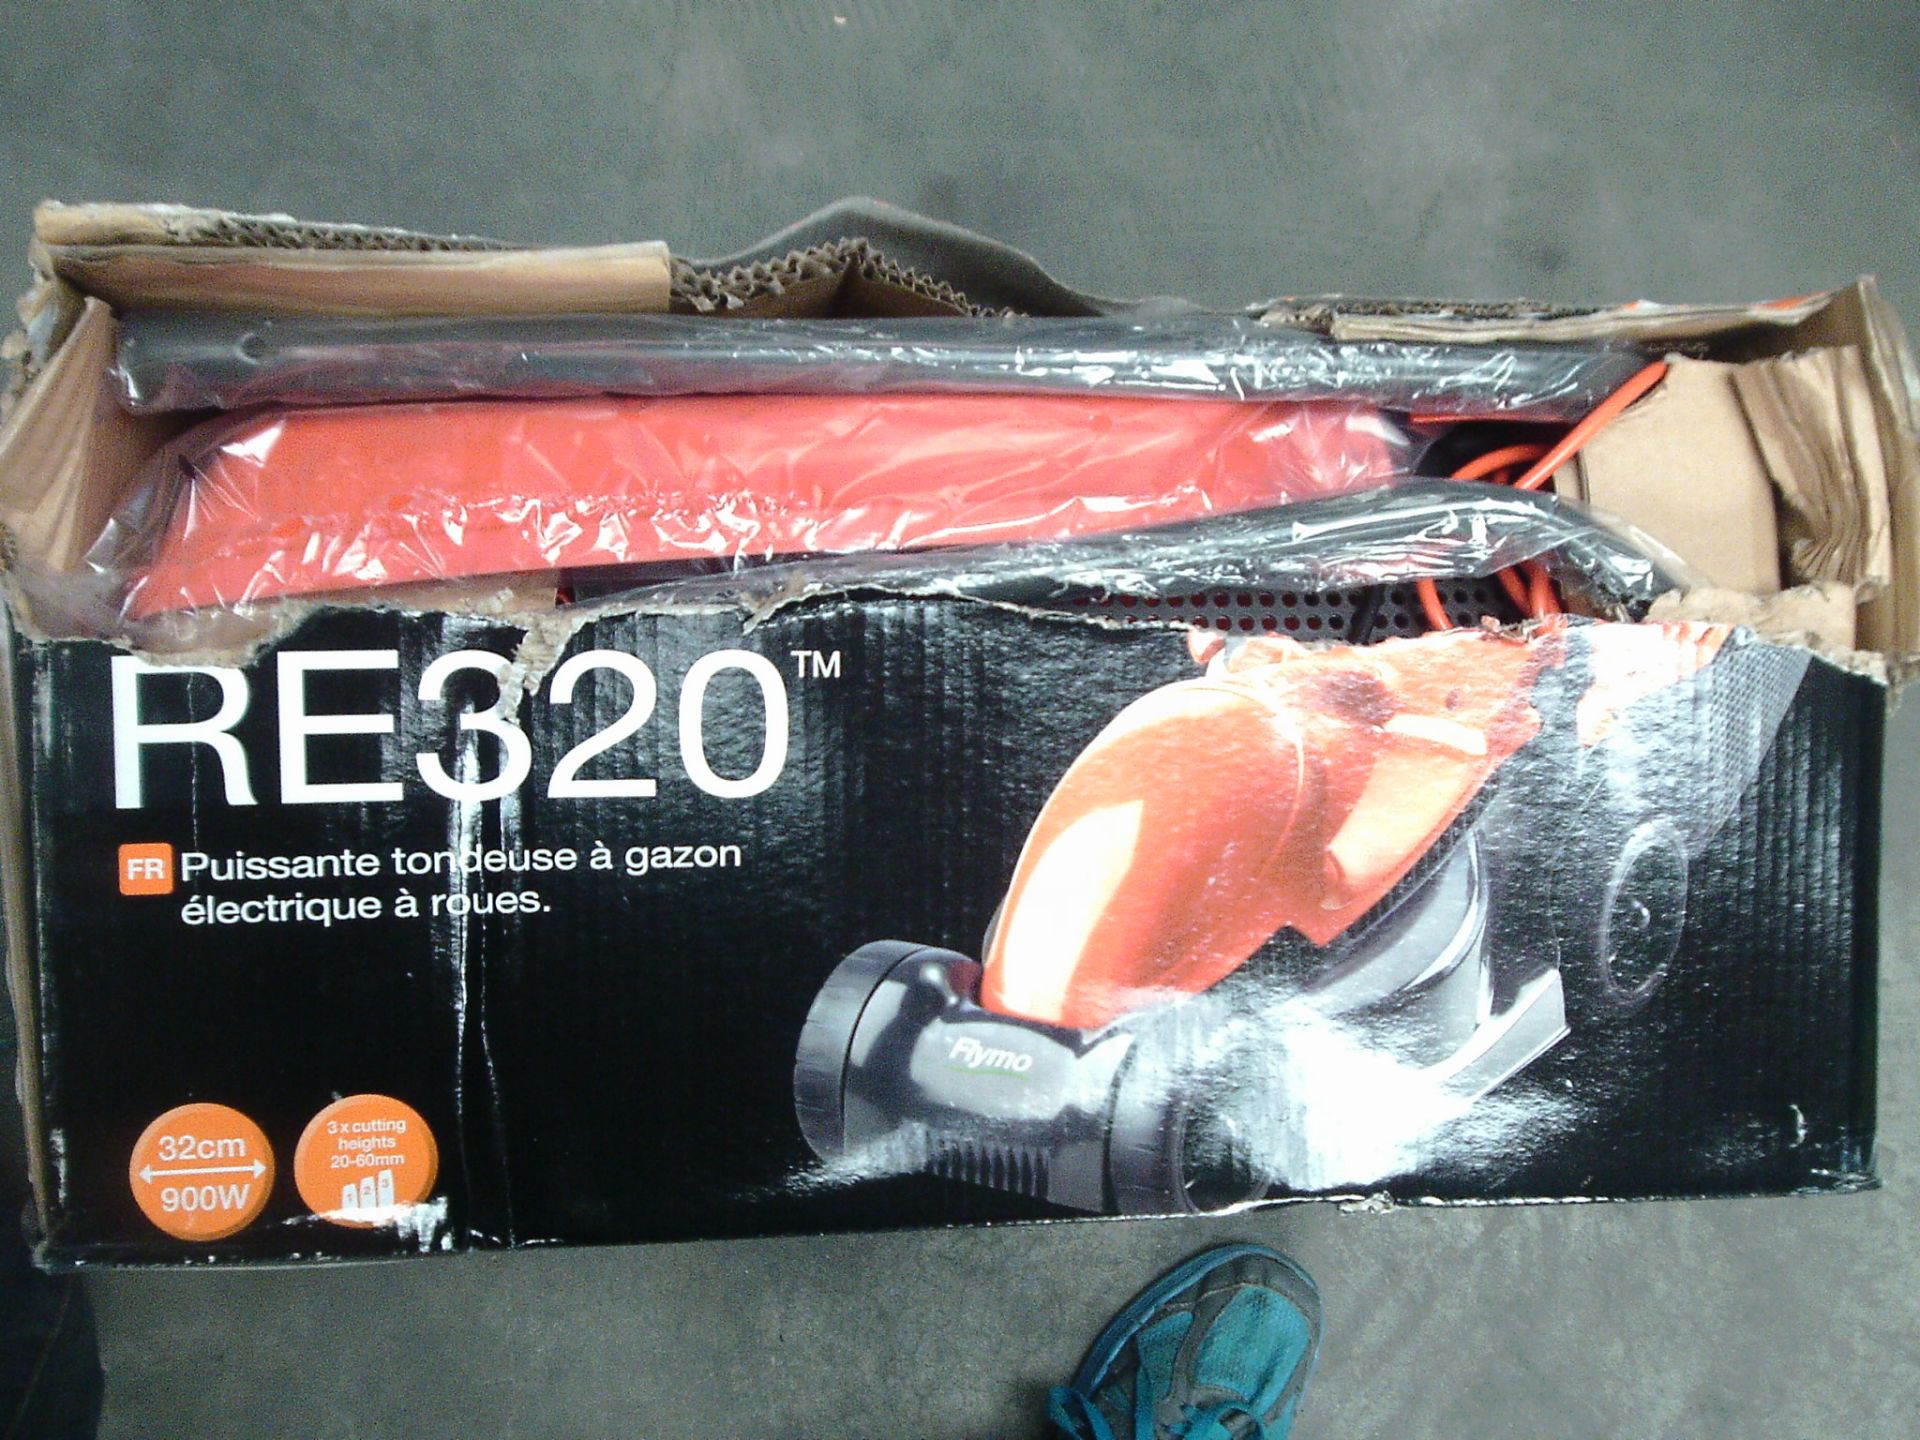 New Flymo RE320 - damage packaging item never out of box - Image 2 of 3